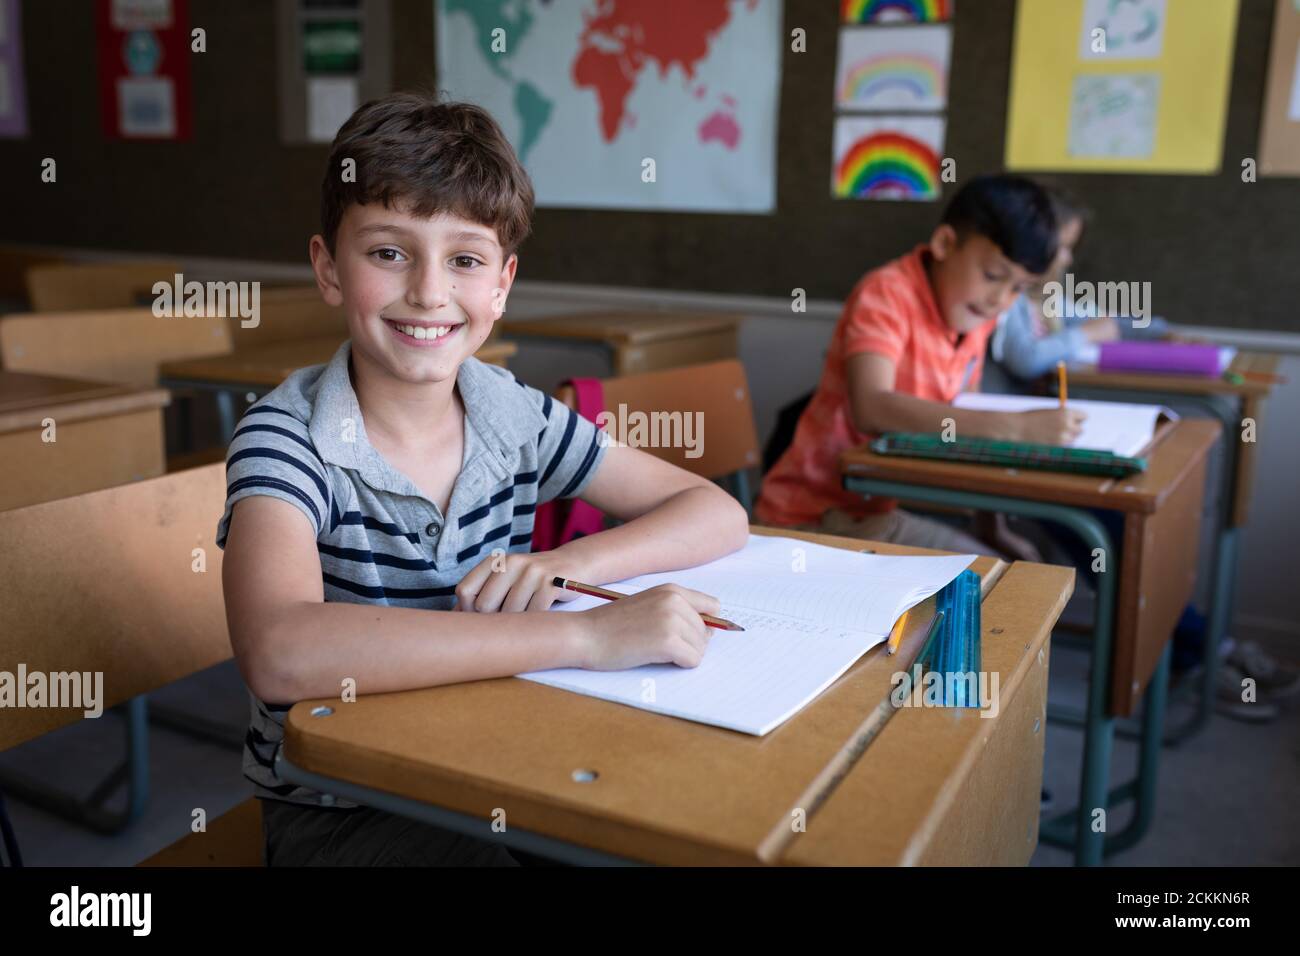 Portrait of boy smiling while sitting on his desk at school Stock Photo